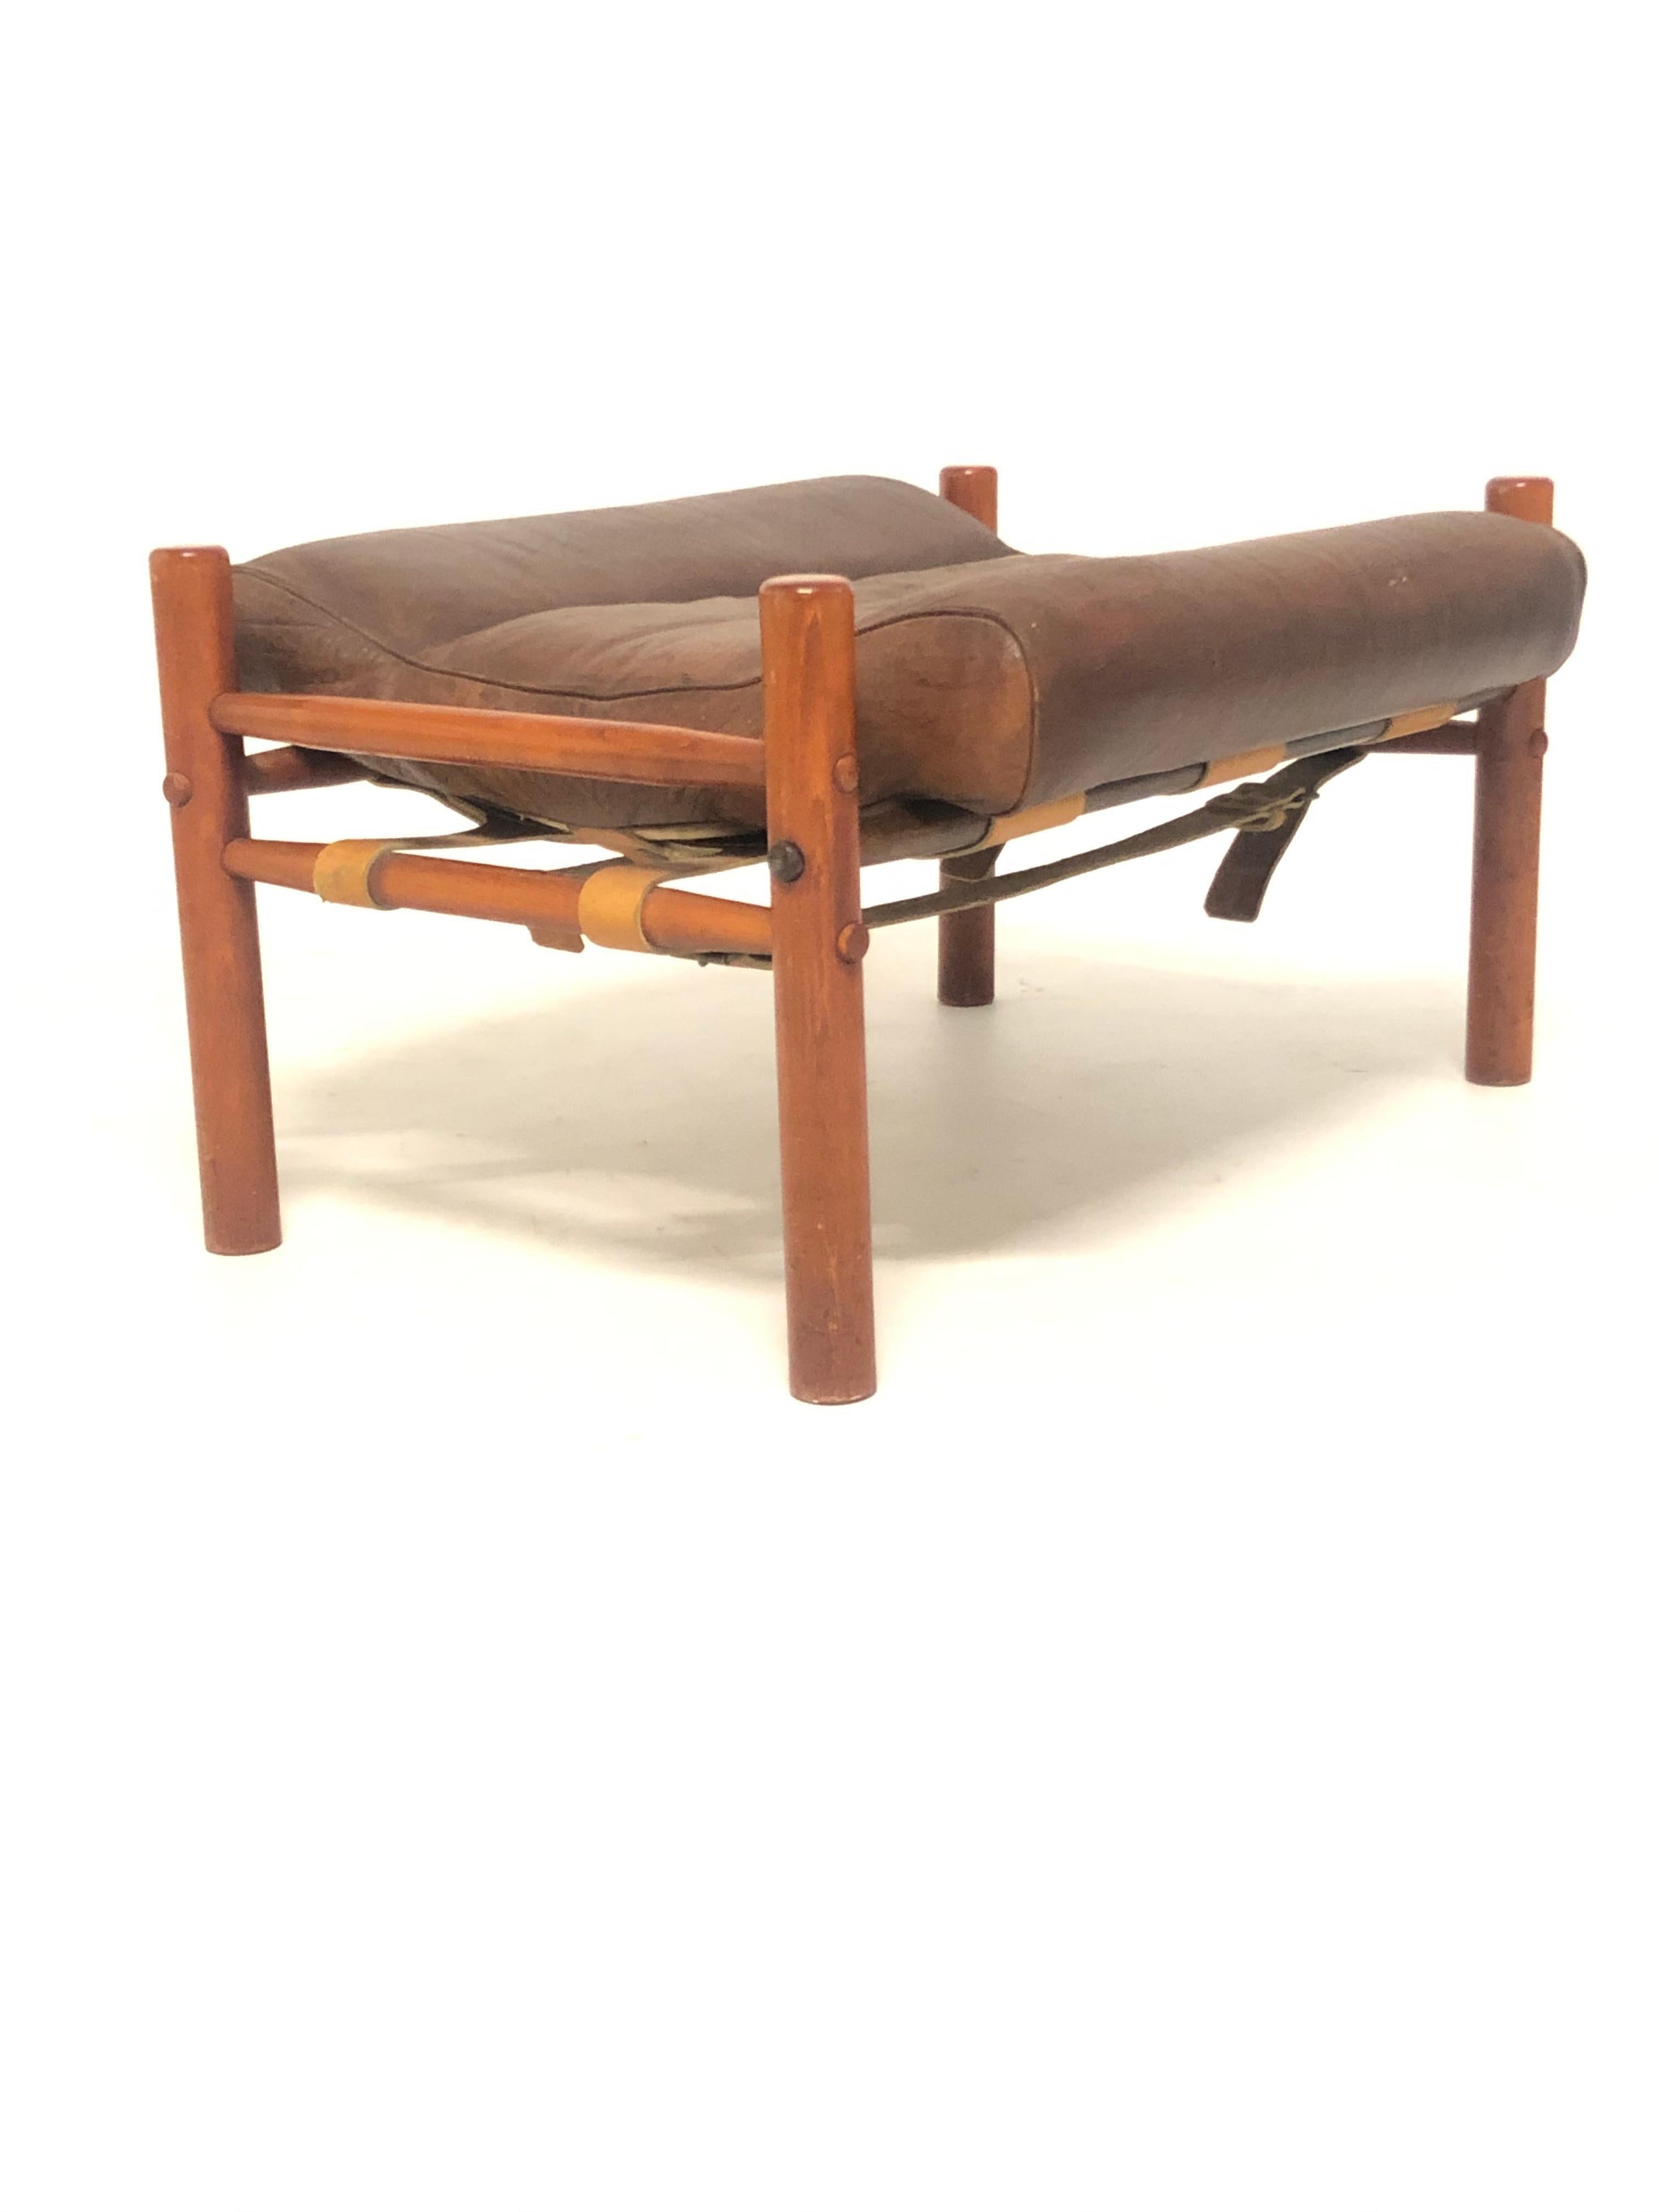 Swedish 1970s Leather Footstool Designed by Arne Norell Manufactured by Norell Ab Sweden